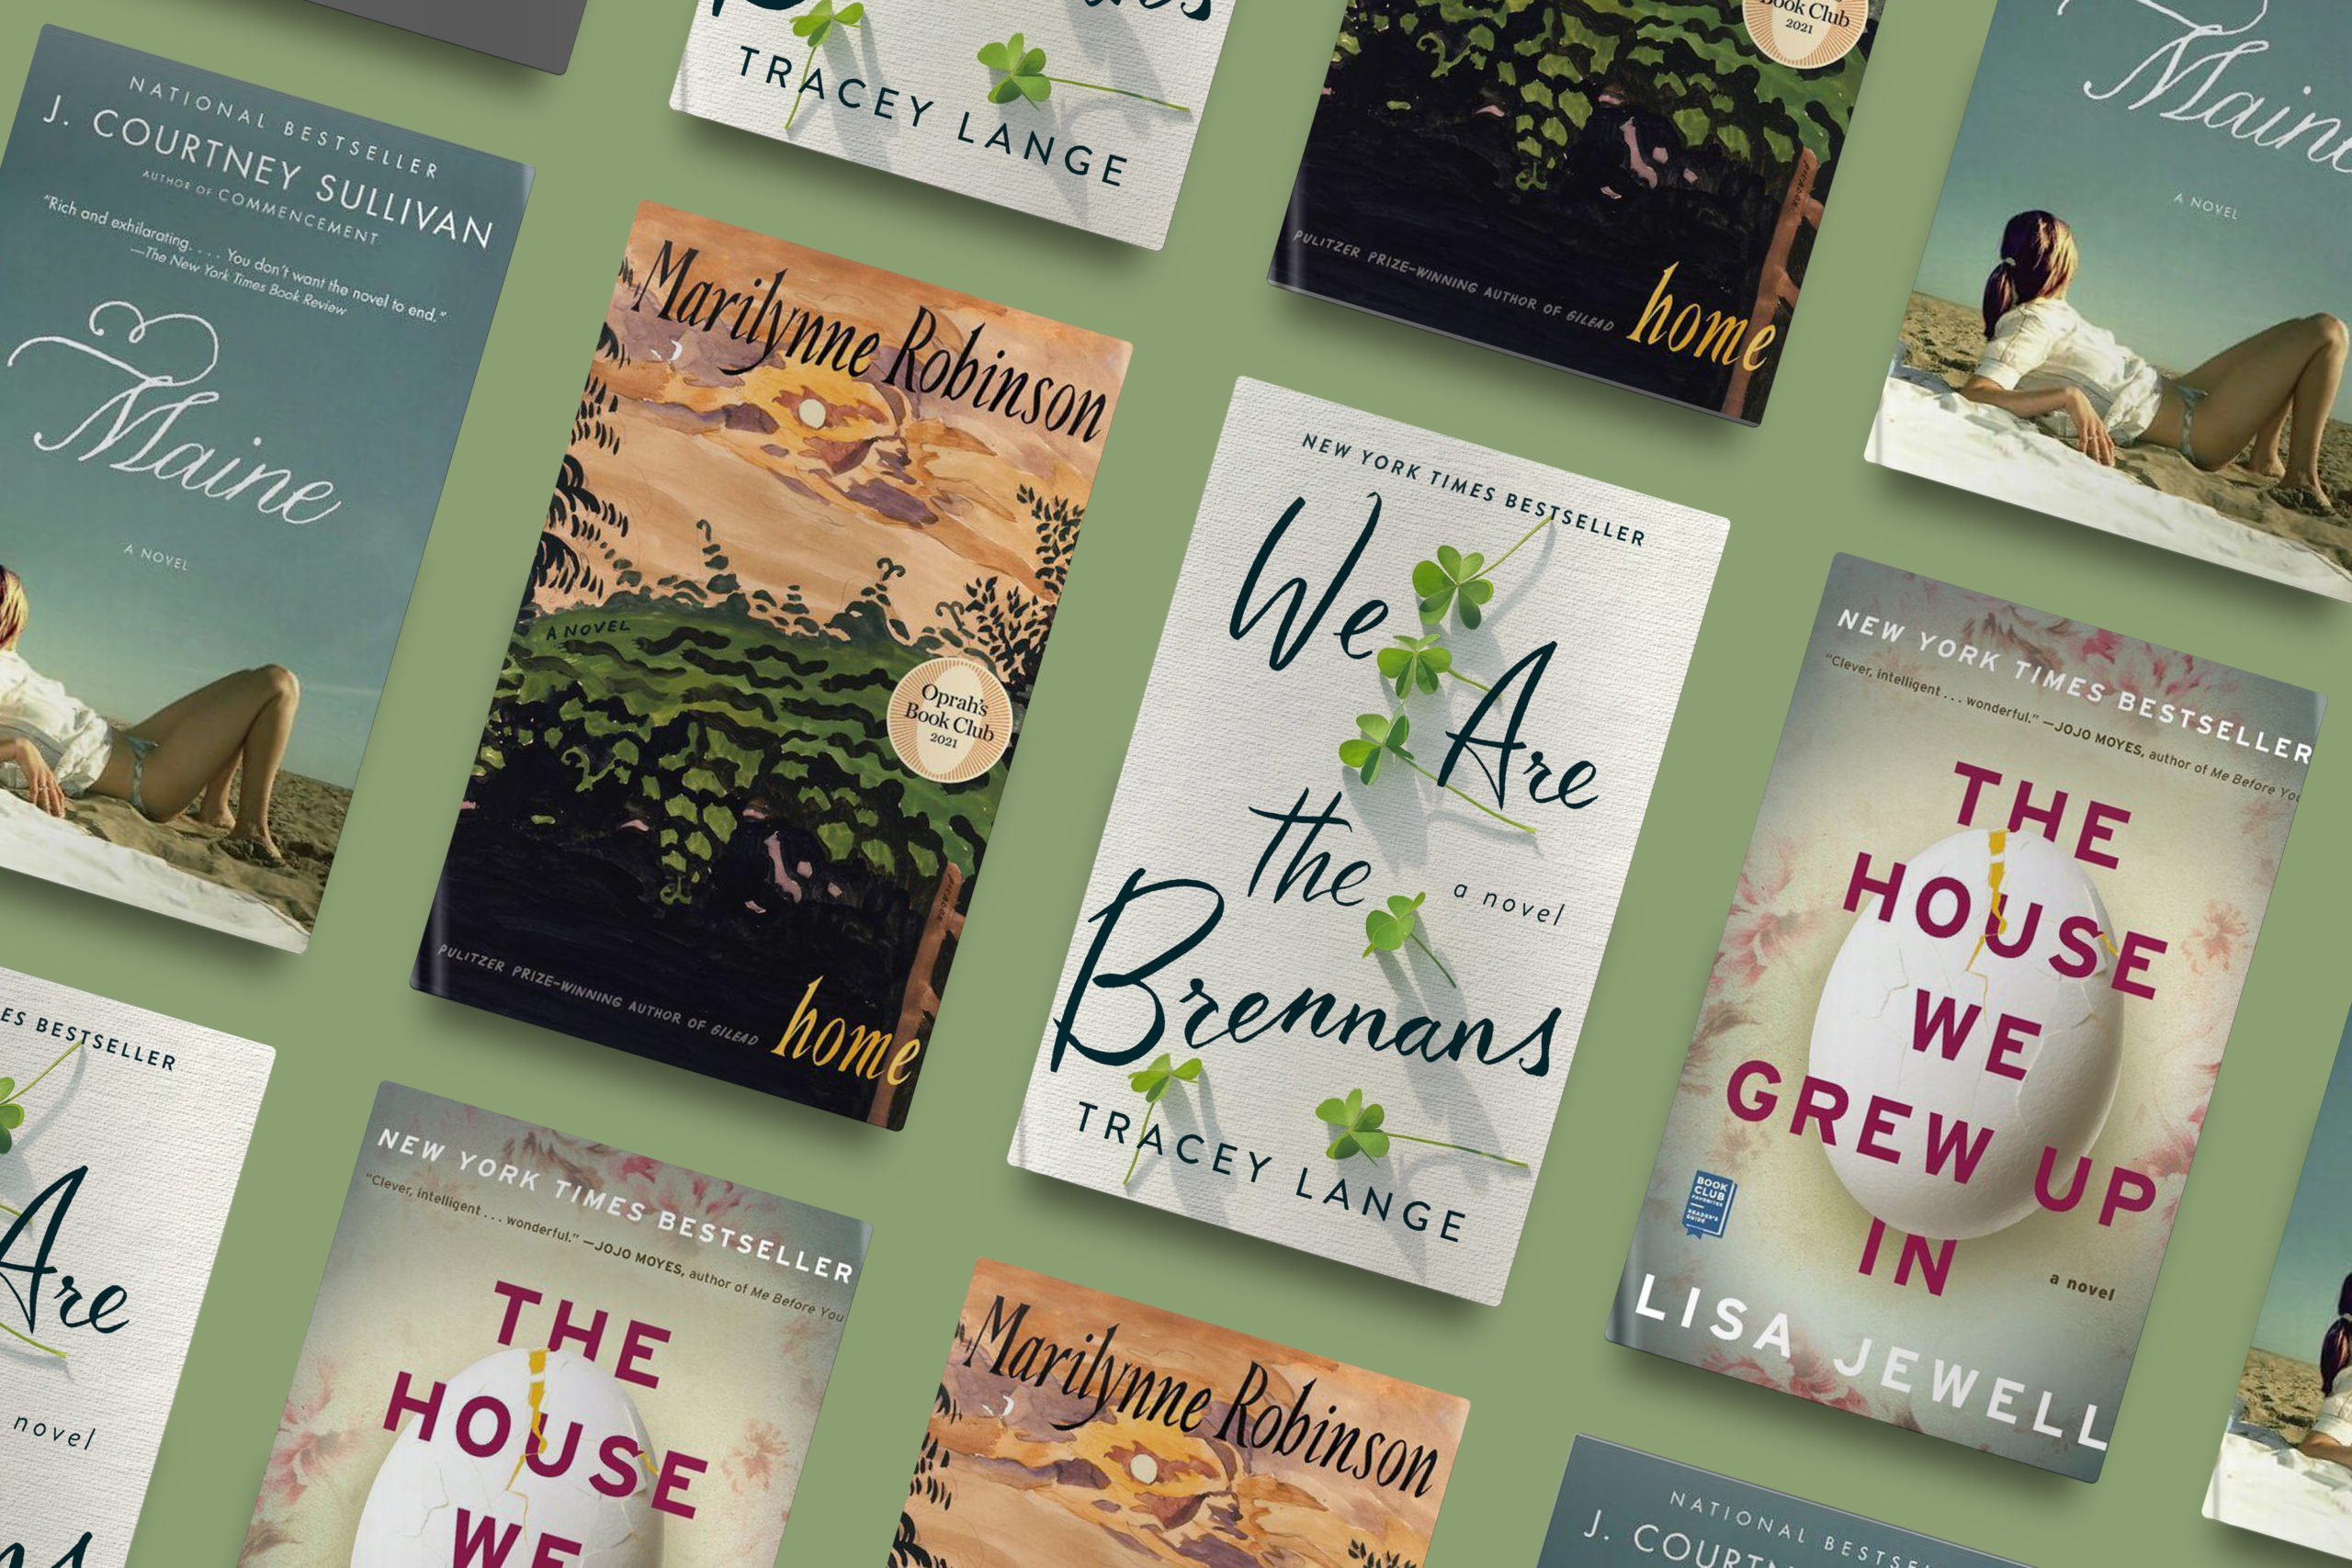 A collection of contemporary novels with their covers on display, suggesting themes of family, home, and personal journeys.